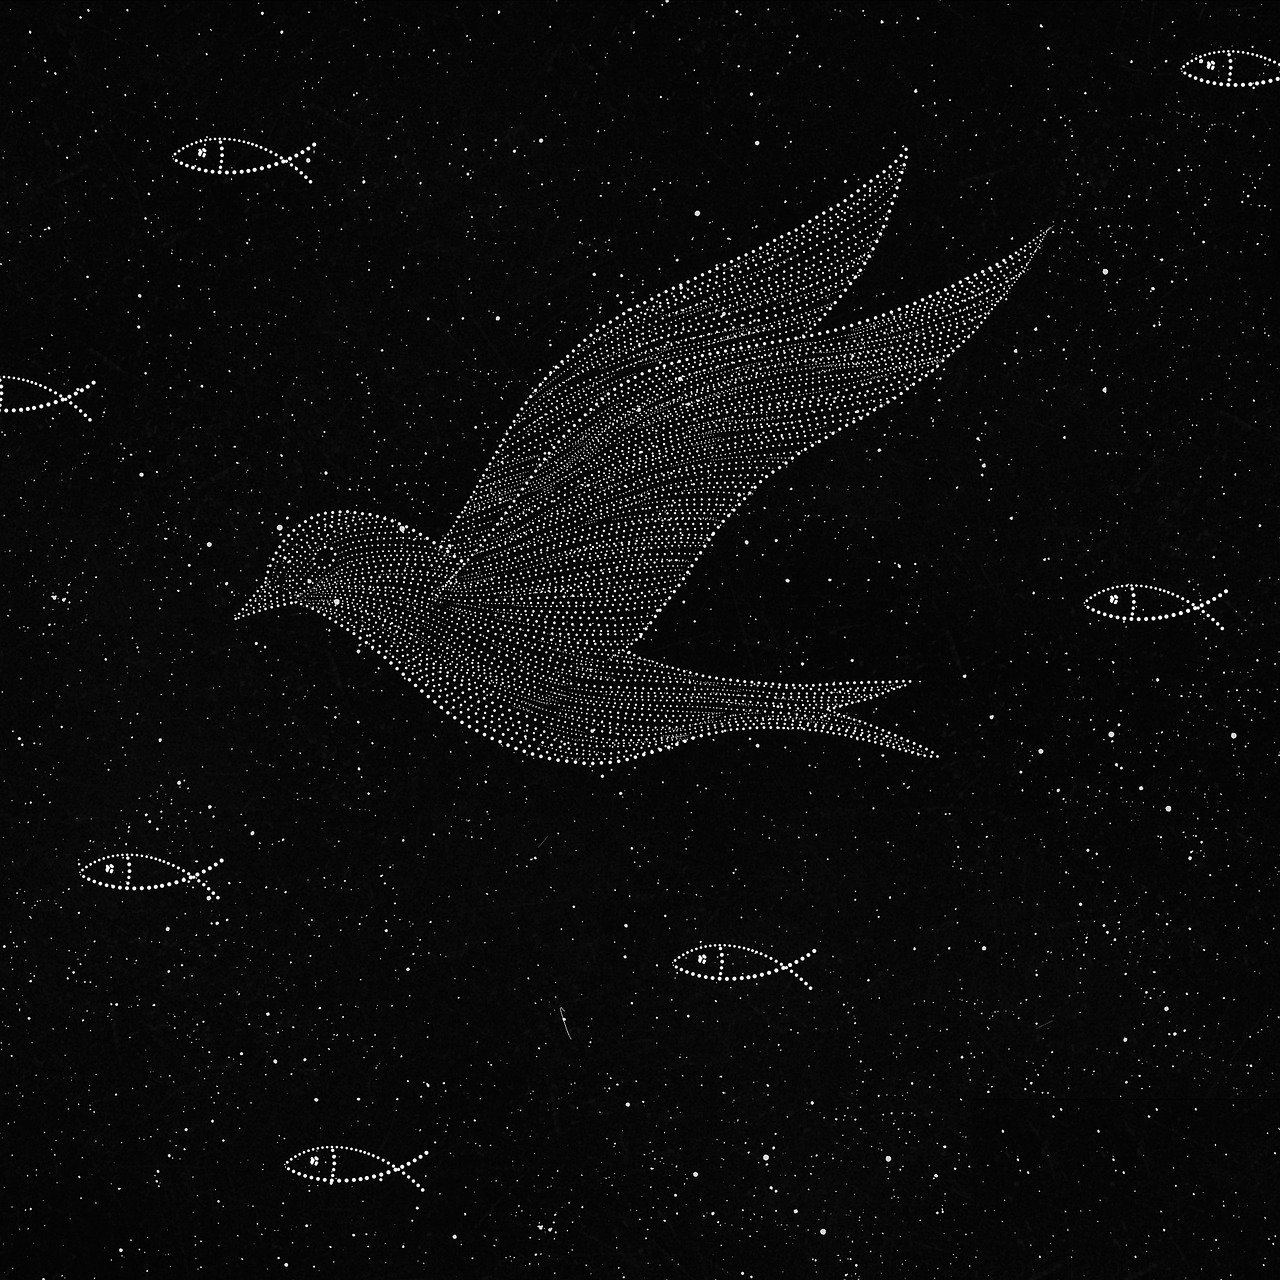 a bird flying over a flock of fish, tumblr, kinetic pointillism, black background with stars, line - art, dwell, malika favre